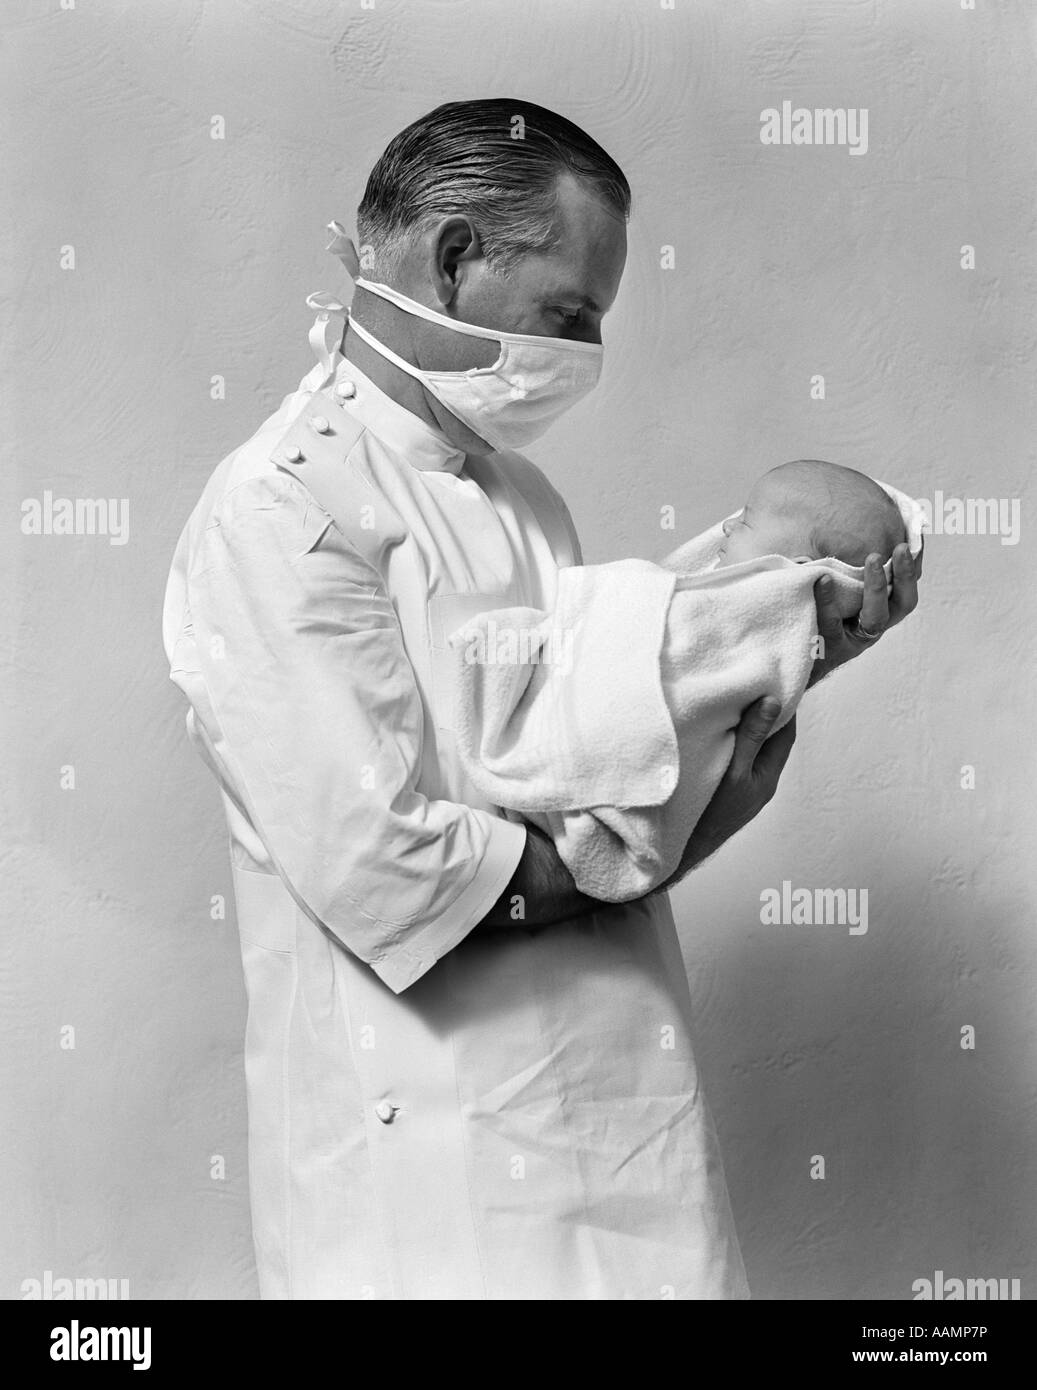 1940s DOCTOR BABY NEWBORN INFANT DELIVERY MASK Stock Photo